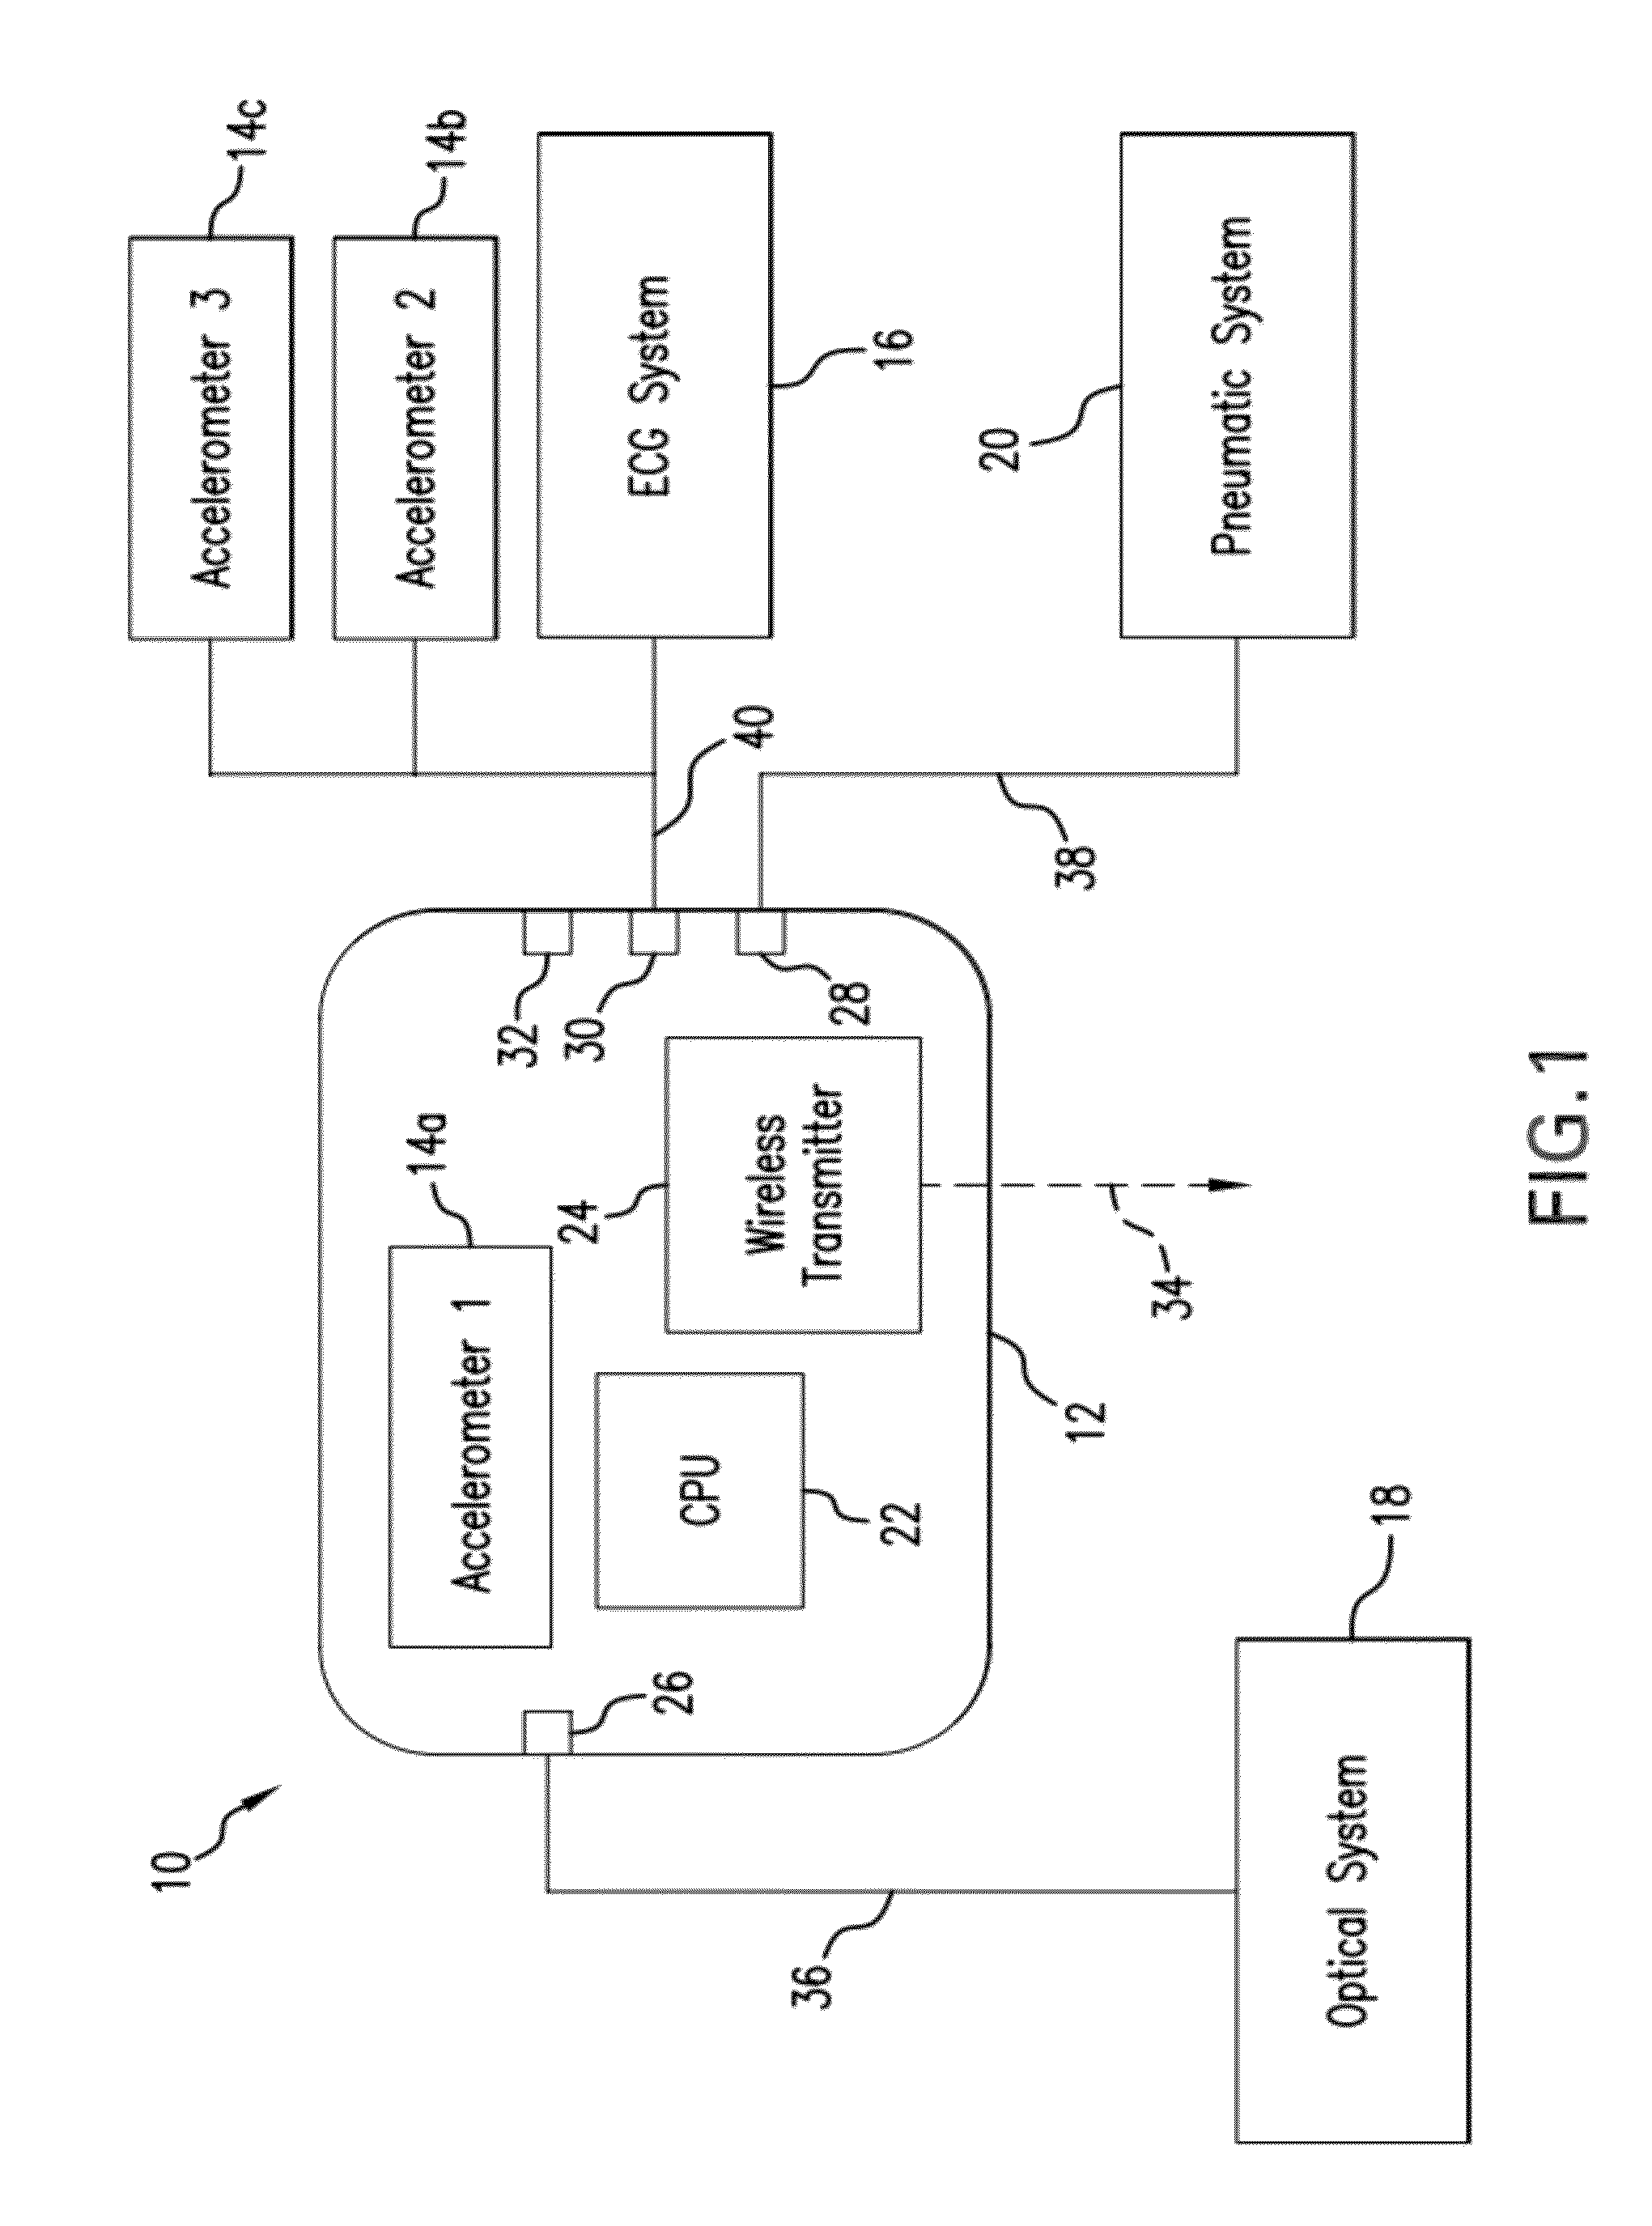 Method for measuring patient motion, activity level, and posture along with PTT-based blood pressure